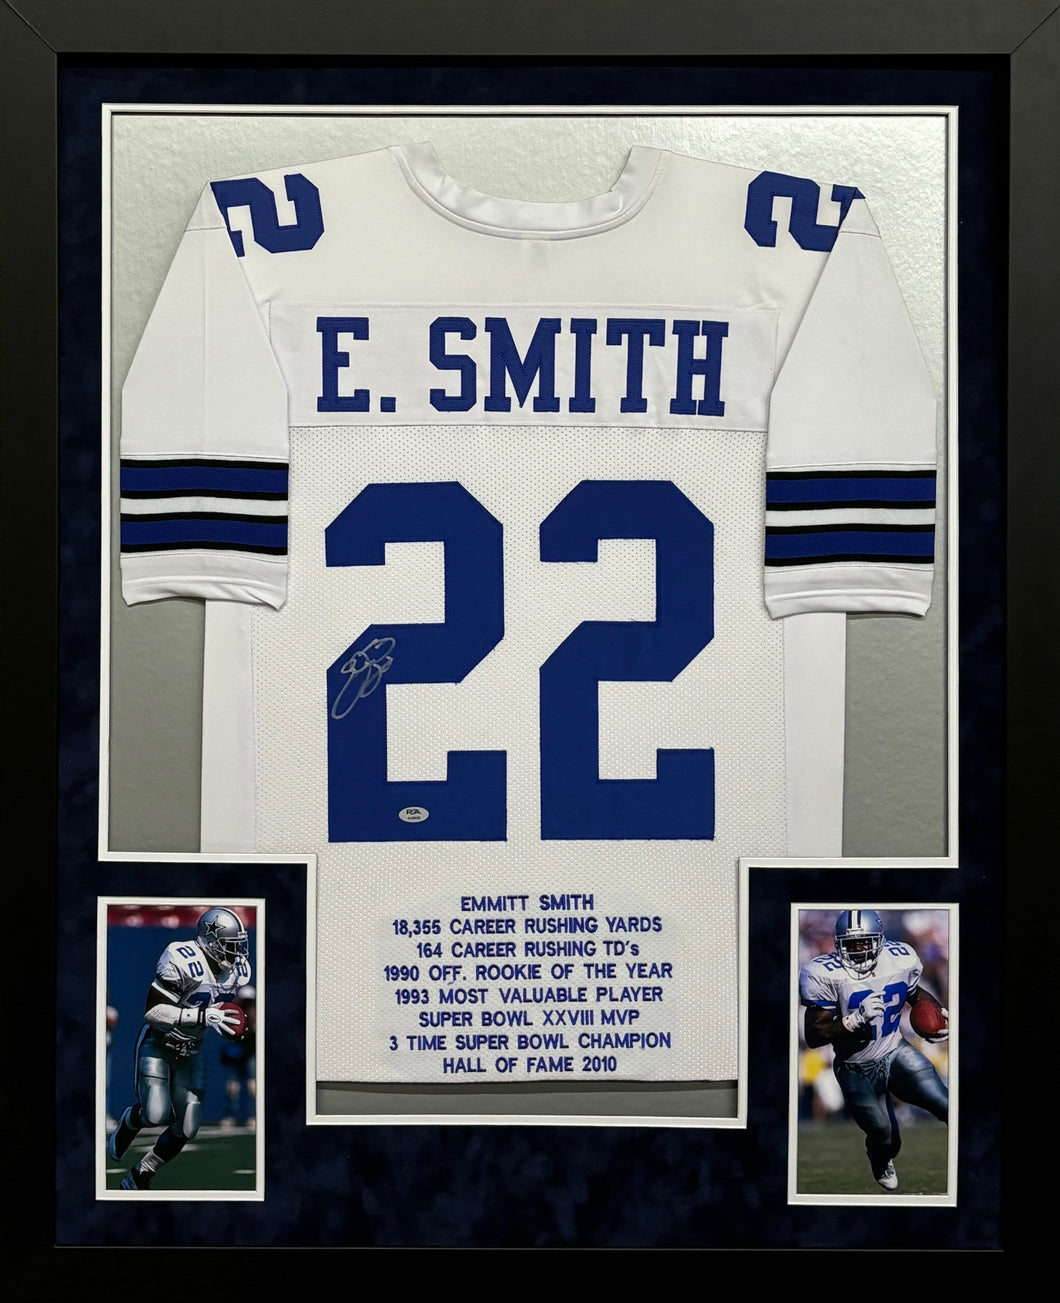 Dallas Cowboys Emmitt Smith Hand Signed Autographed White Stat Jersey Framed & Suede Matted with PSA COA